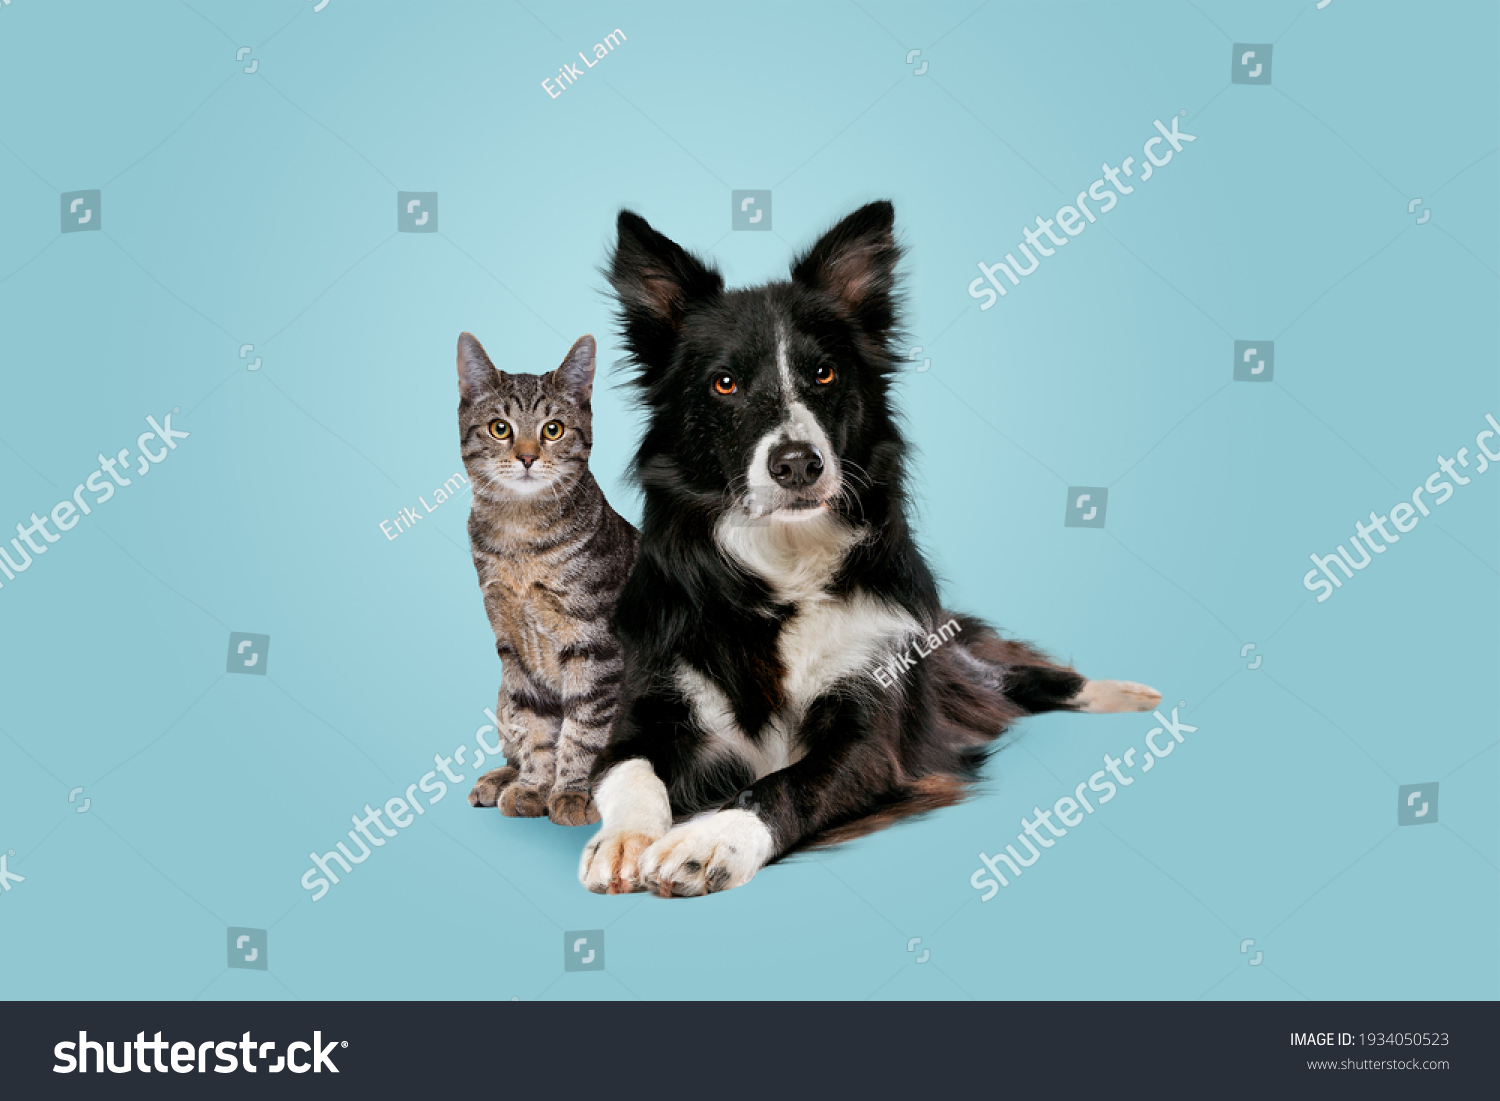 tabby cat and border collie dog in front of a blue gradient background #1934050523